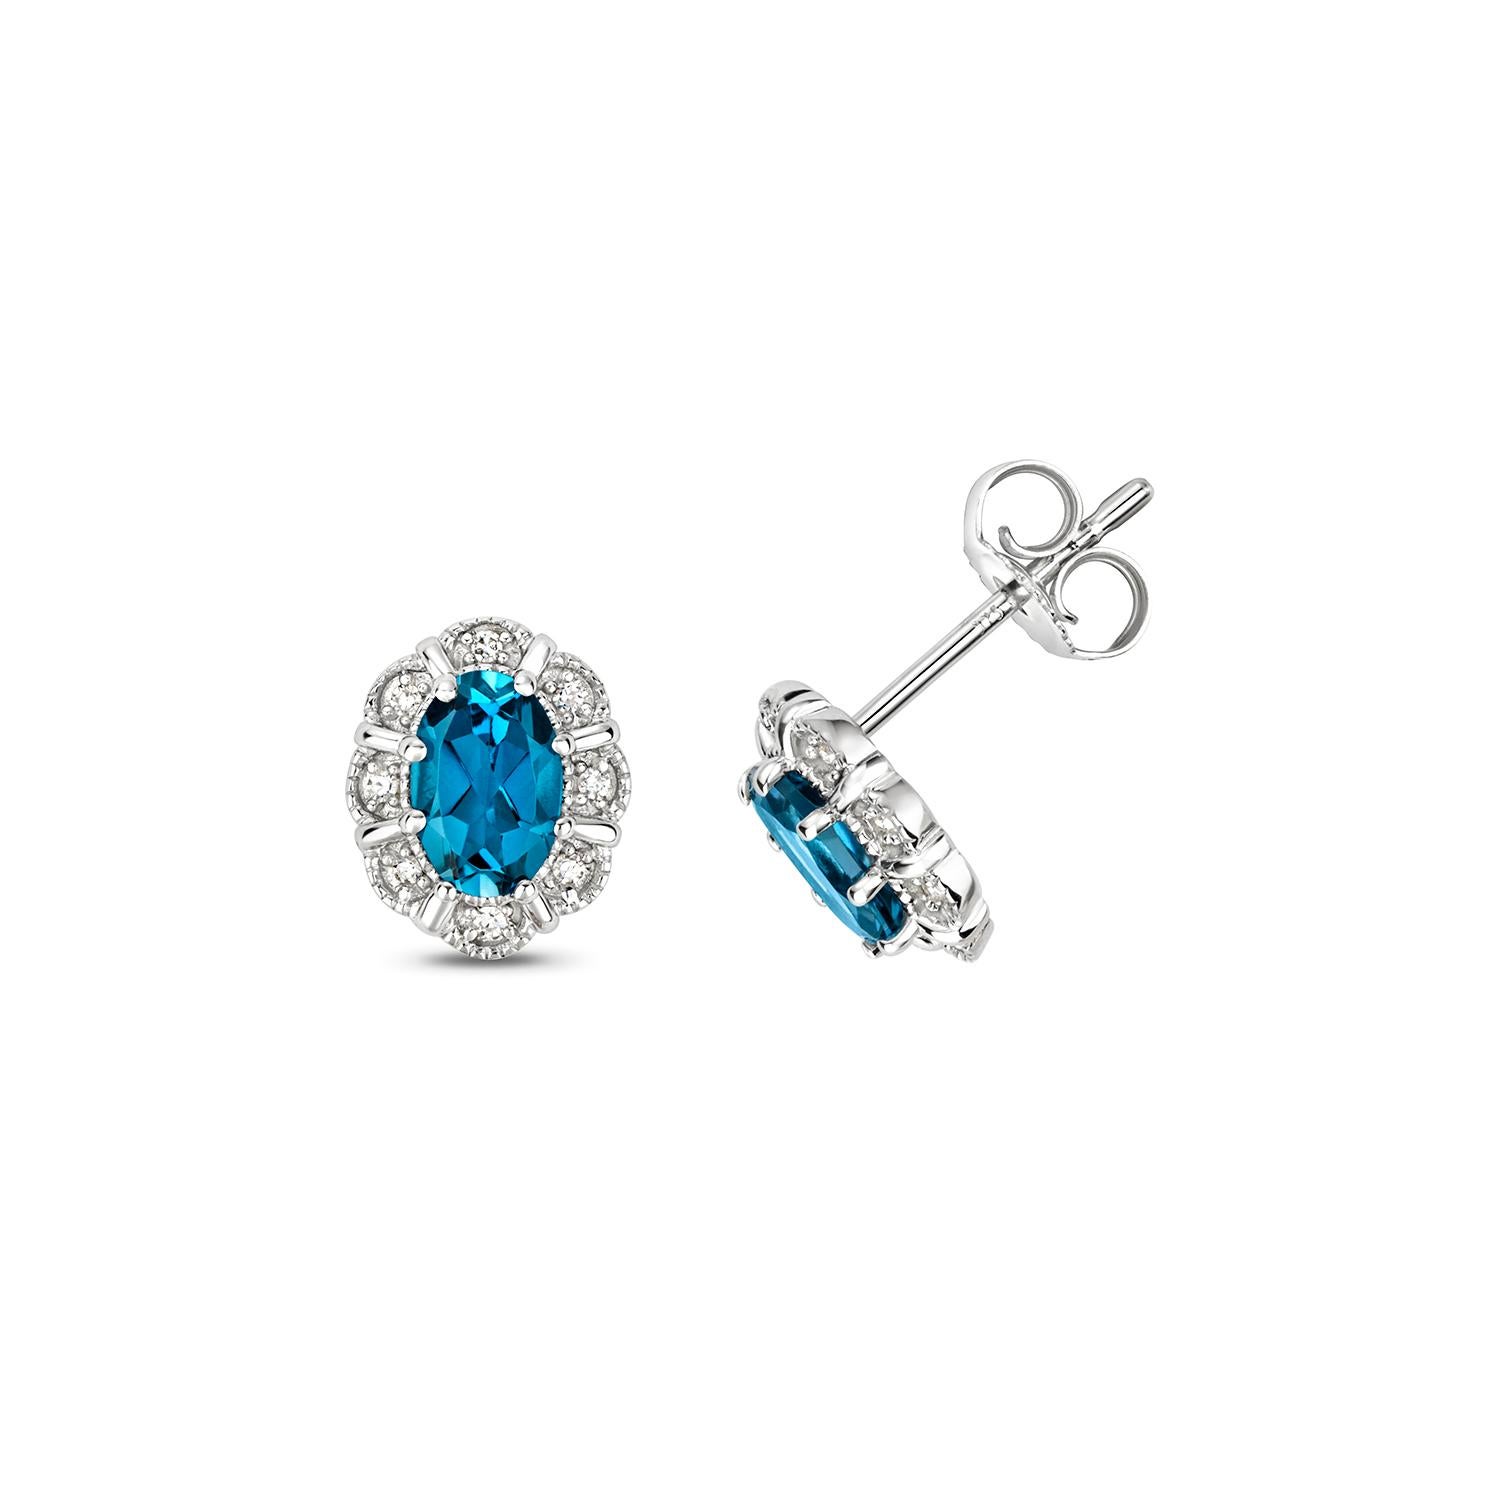 DIAMOND & OV LONDON BLUE TOPAZ STUDS

9CT W/G SC/0.04CT LBT/1.06CT

Weight: 1.4g

Number Of Stones:2+16

Total Carates:1.060+0.040